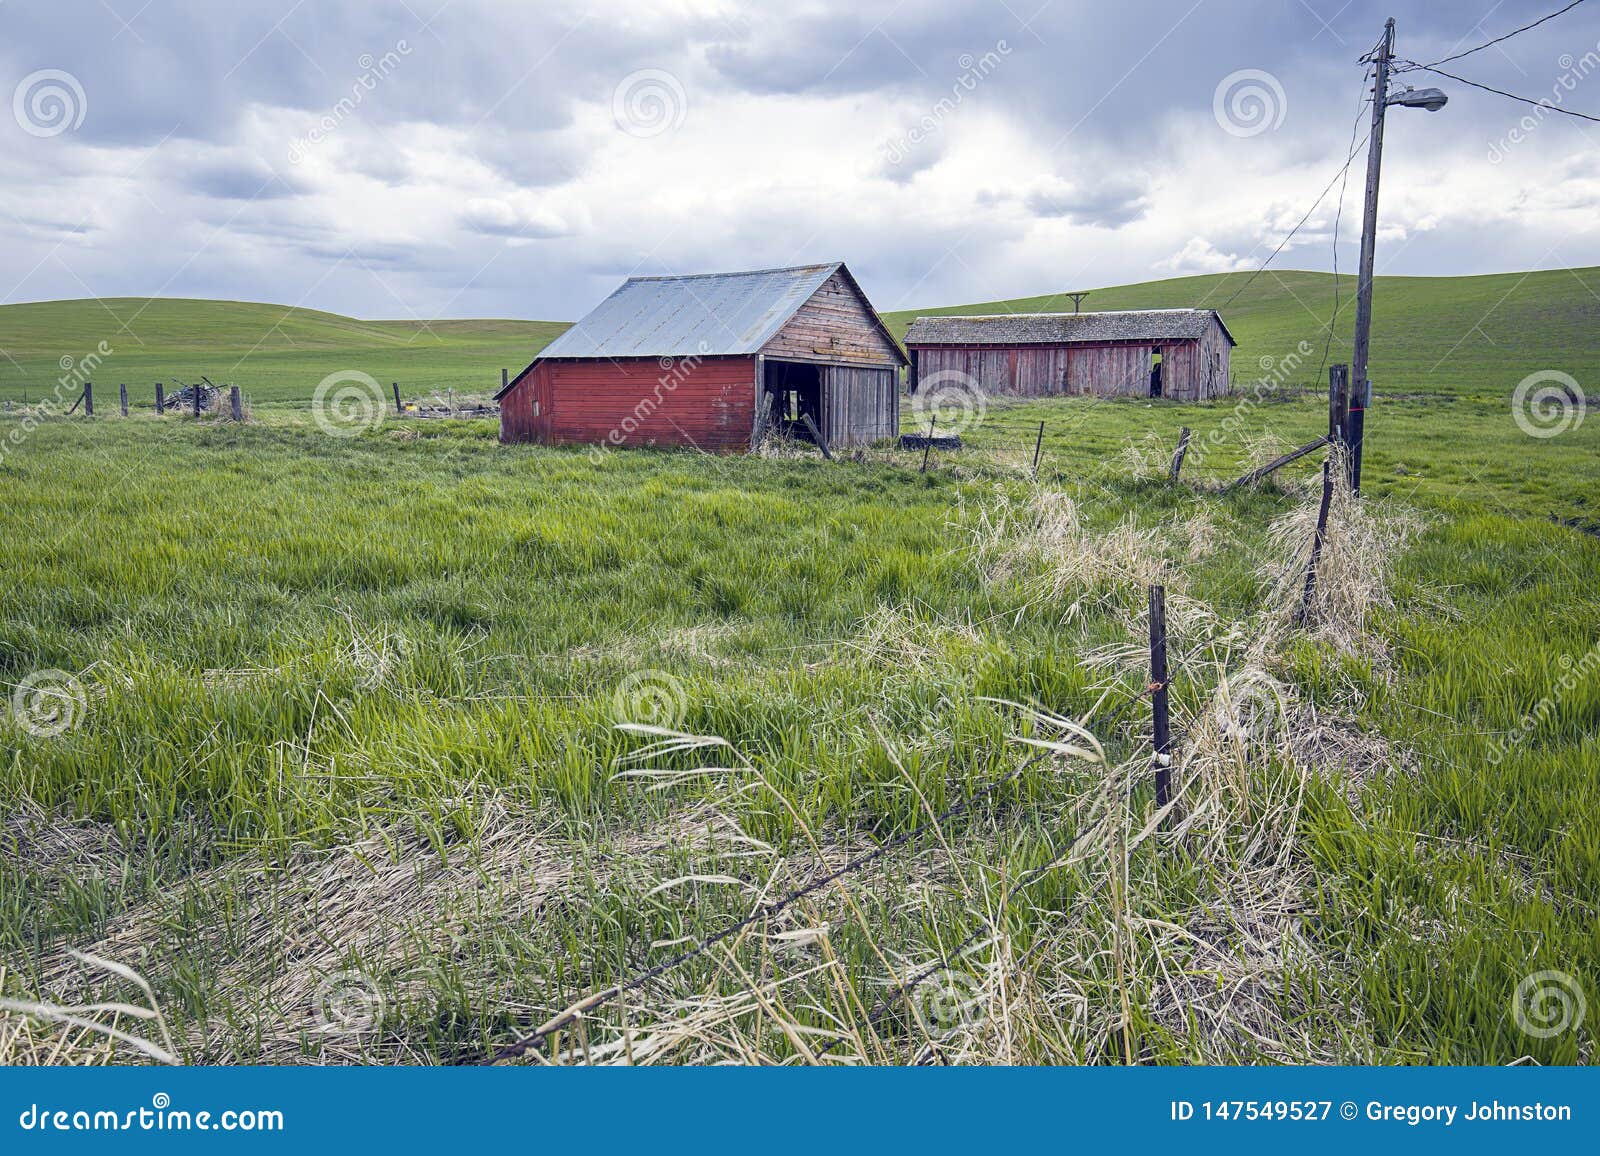 Old Red Barn In The Palouse Stock Image - Image of palouse ...